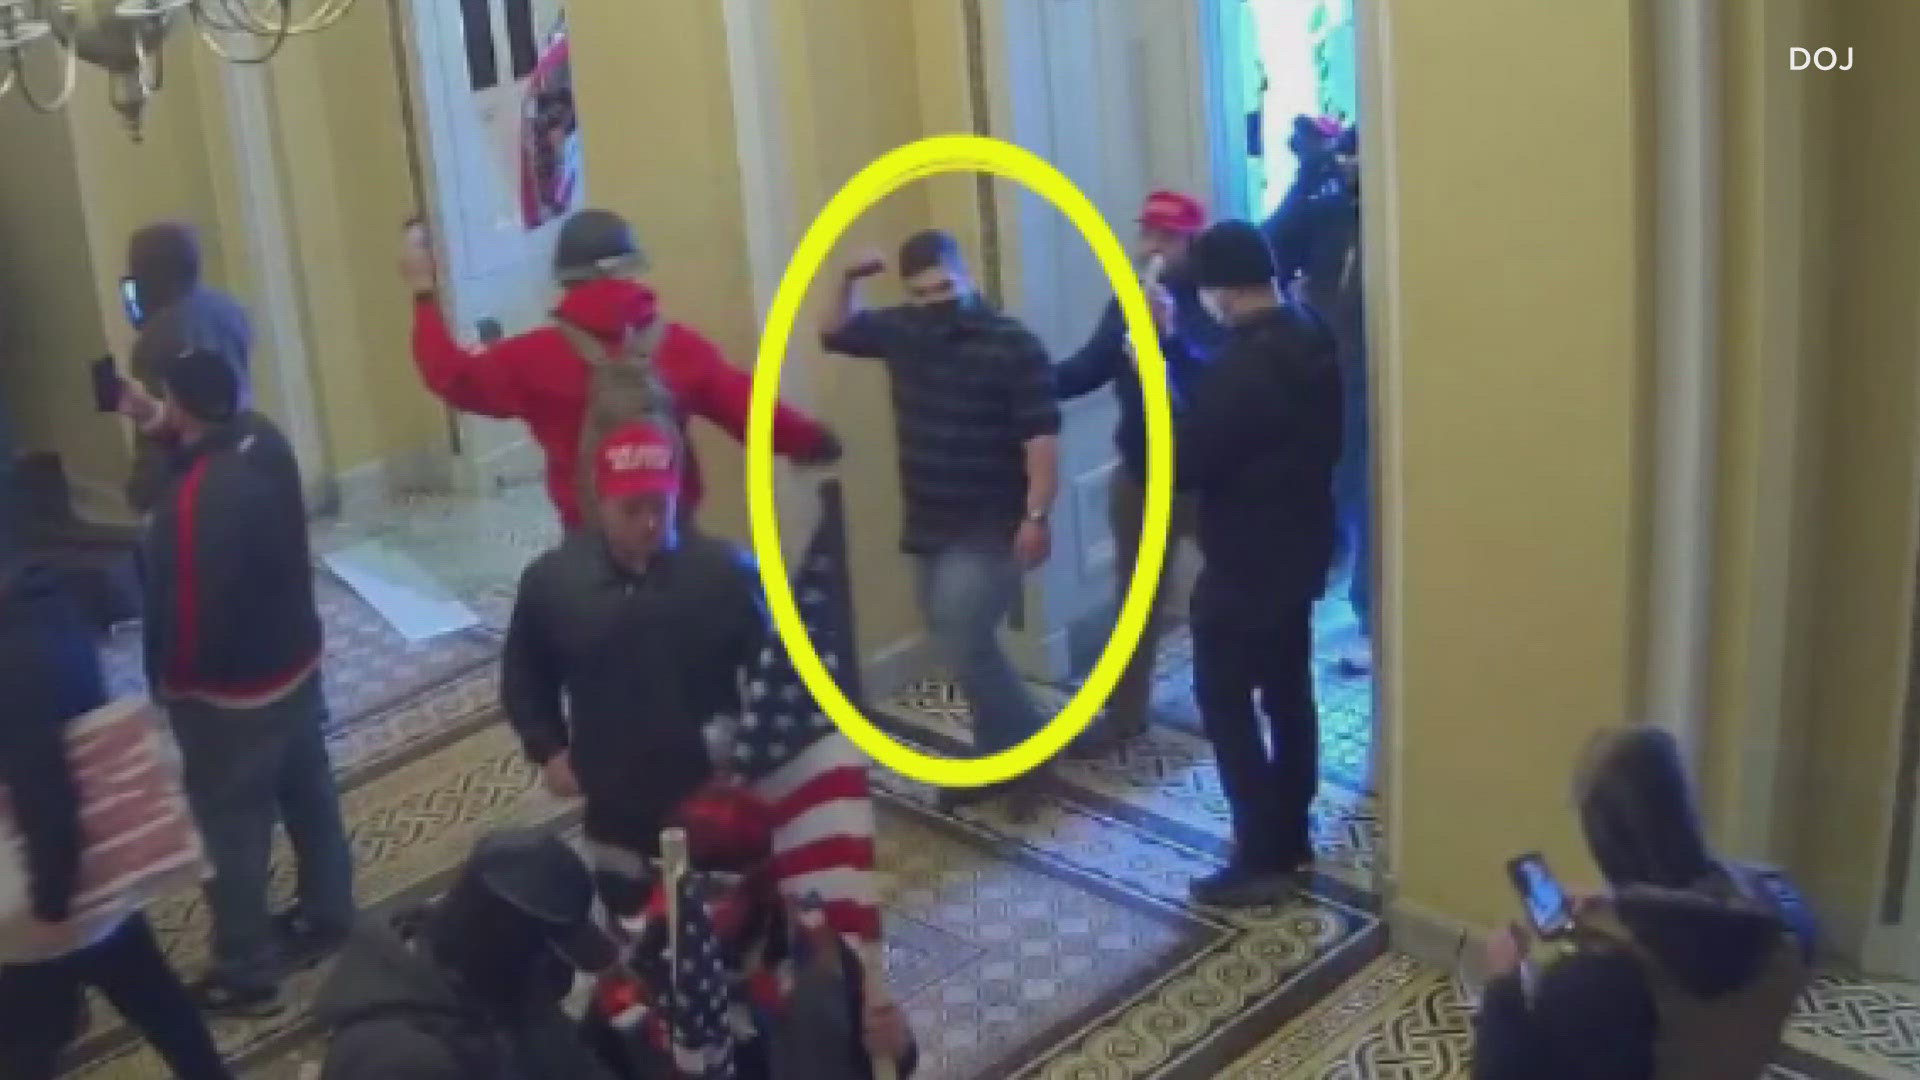 The FBI alleges Benjamin Bowden entered the U.S. Capitol building and kicked a closed door.